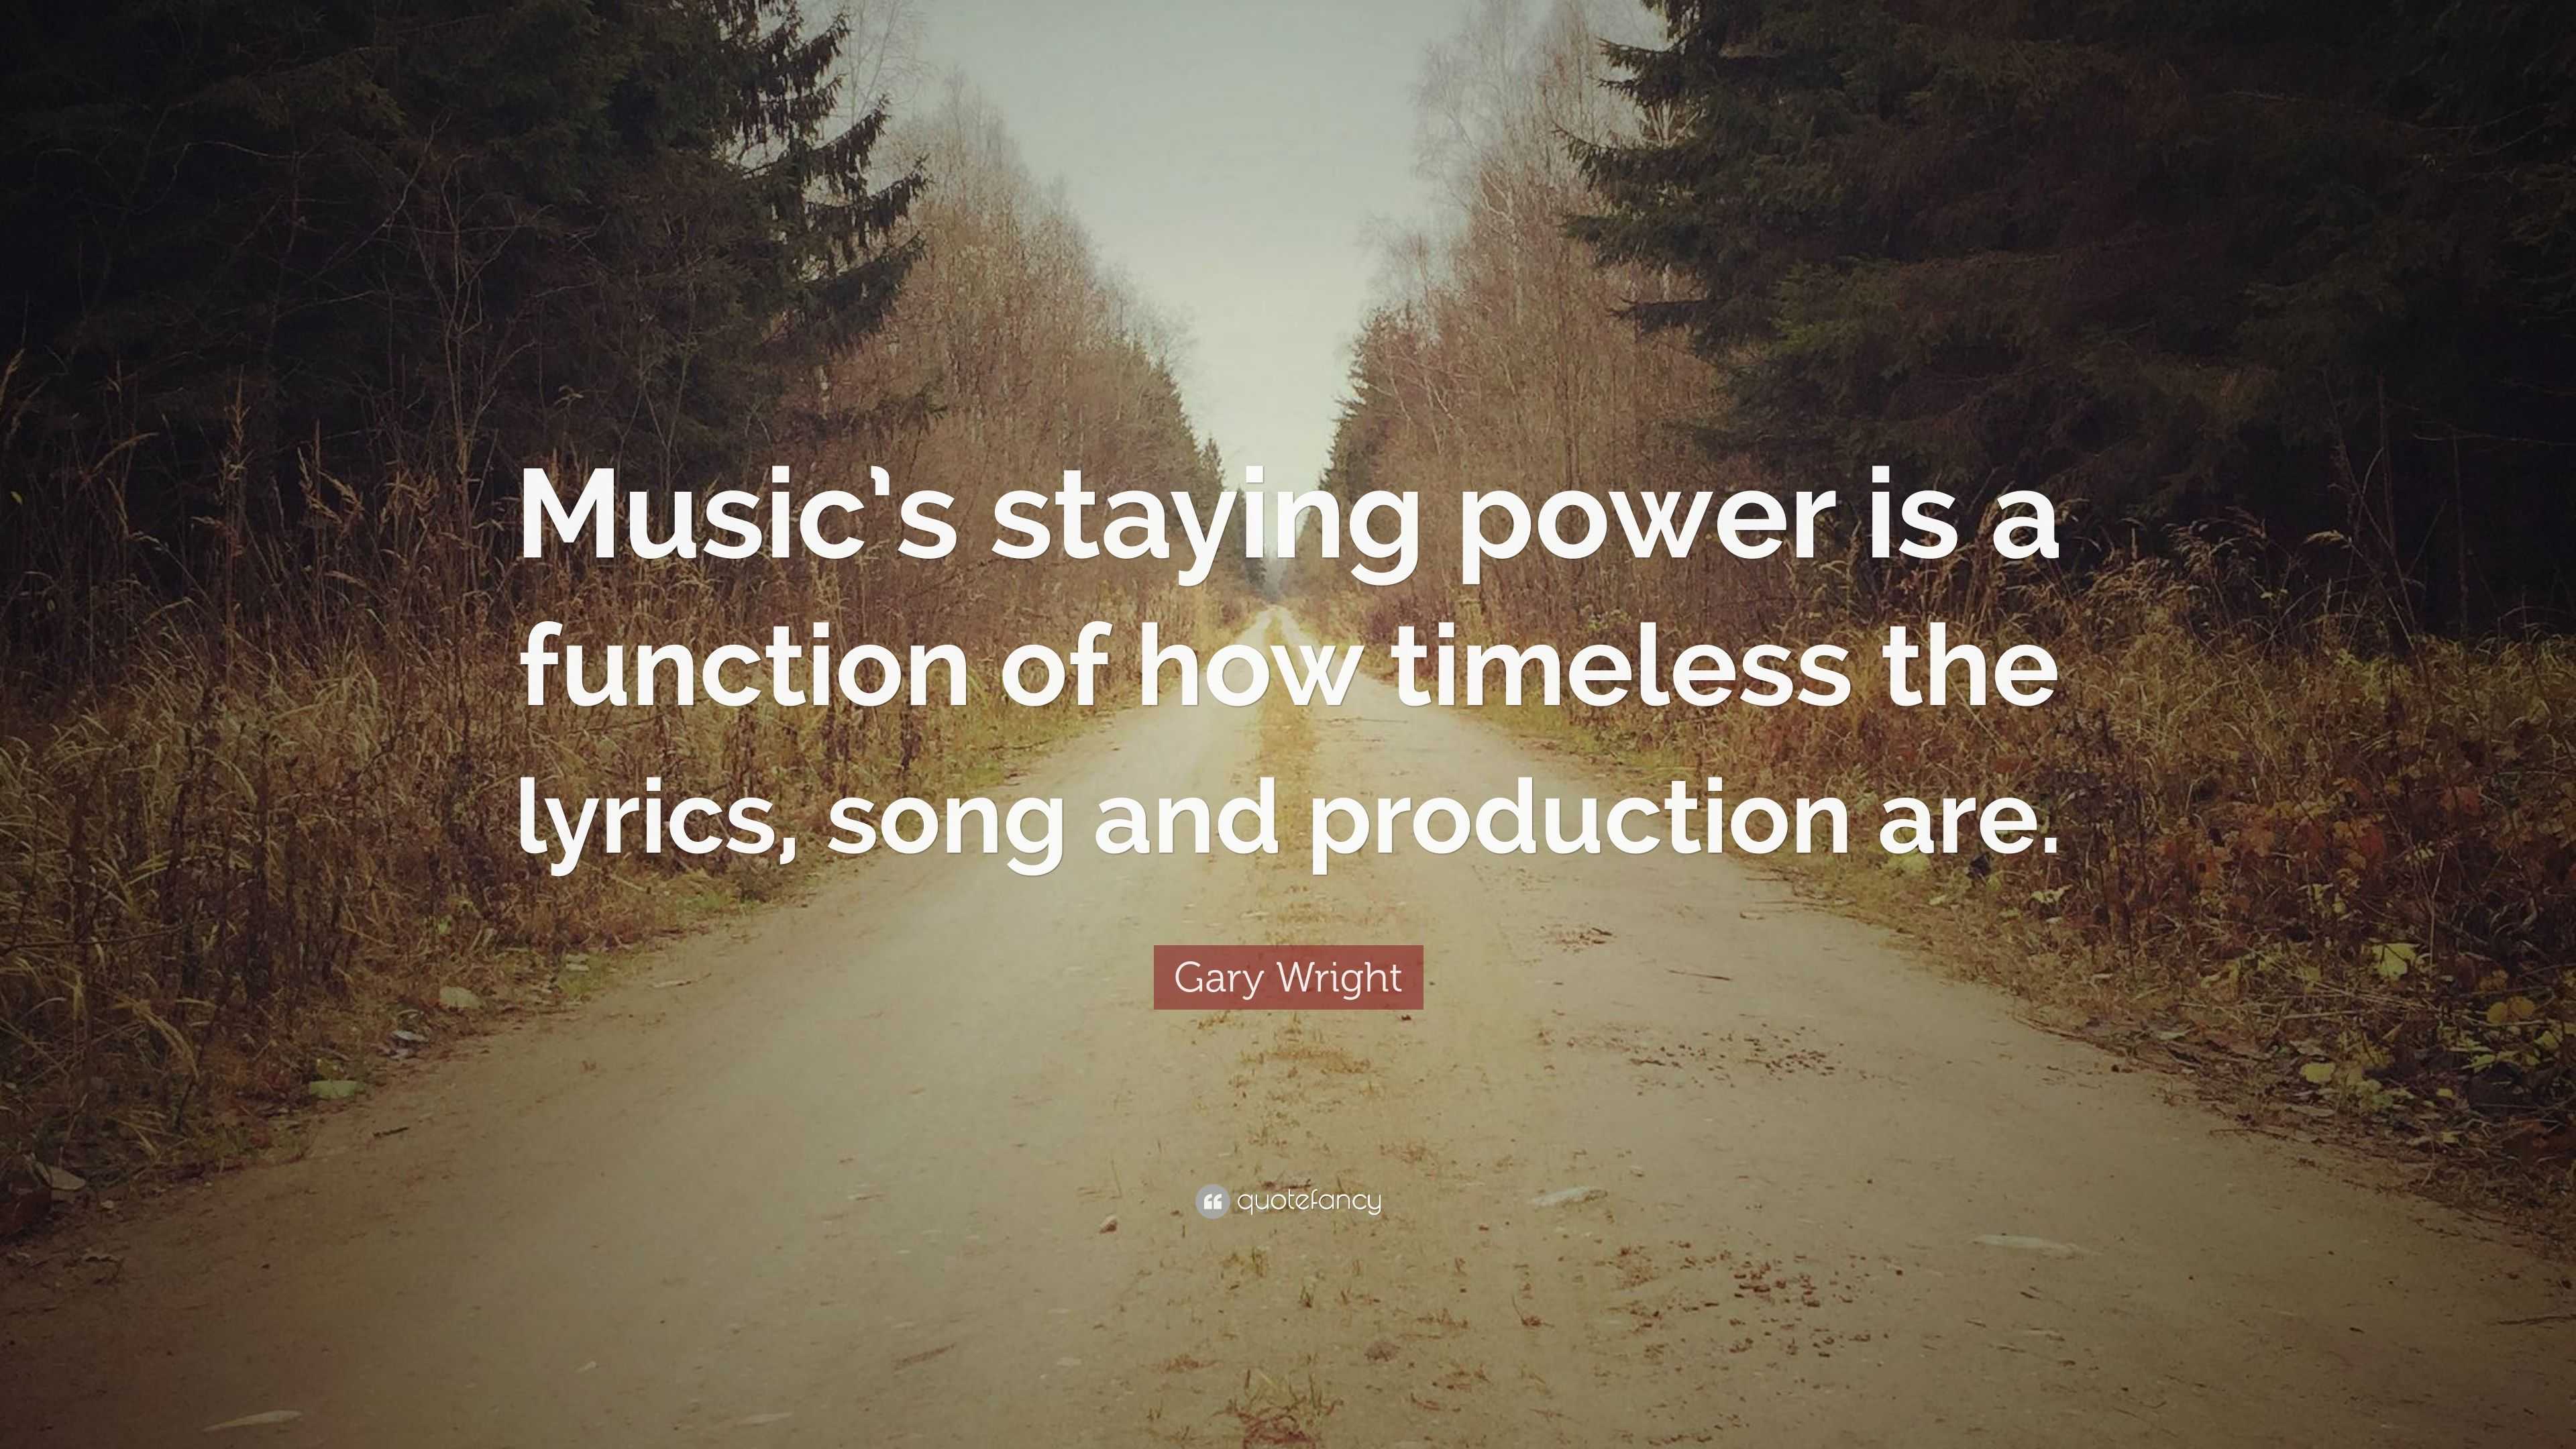 Gary Wright Quote: “Music's staying power is a function of how timeless the  lyrics, song and